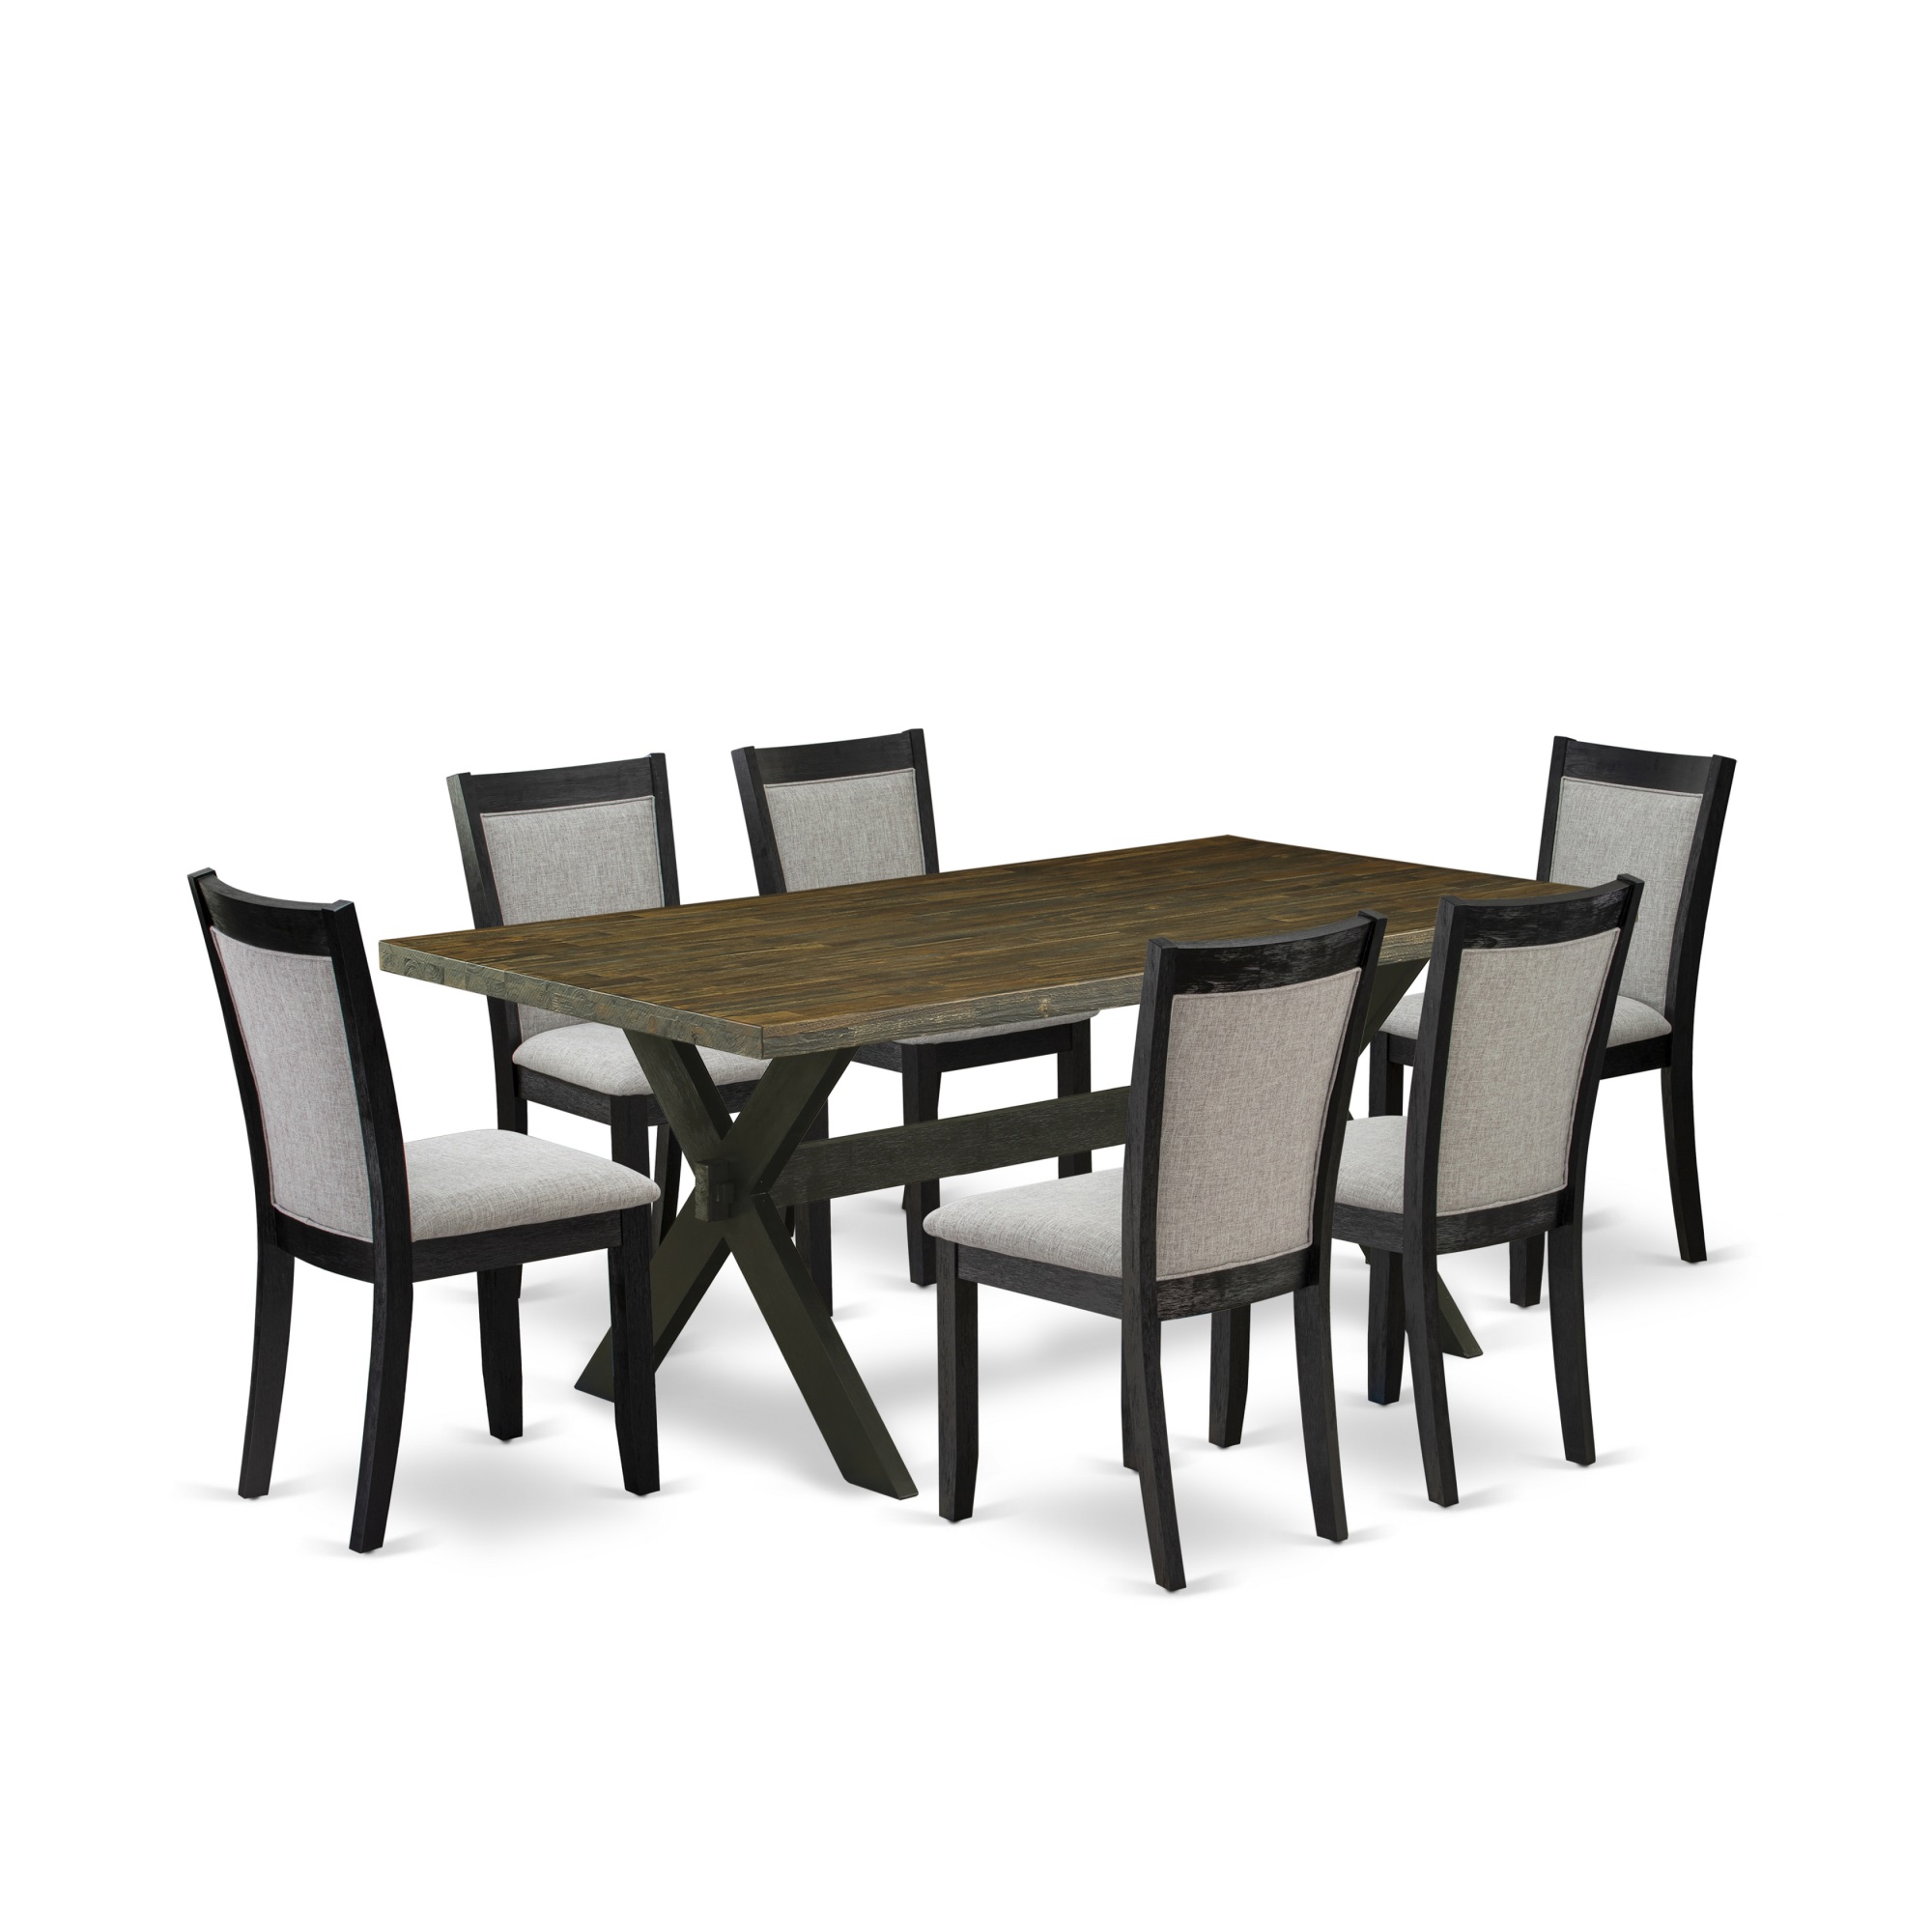 East West Furniture X677MZ606-7 7Pc Dining Room Set - Rectangular Table and 6 Parson Chairs - Multi-Color Color